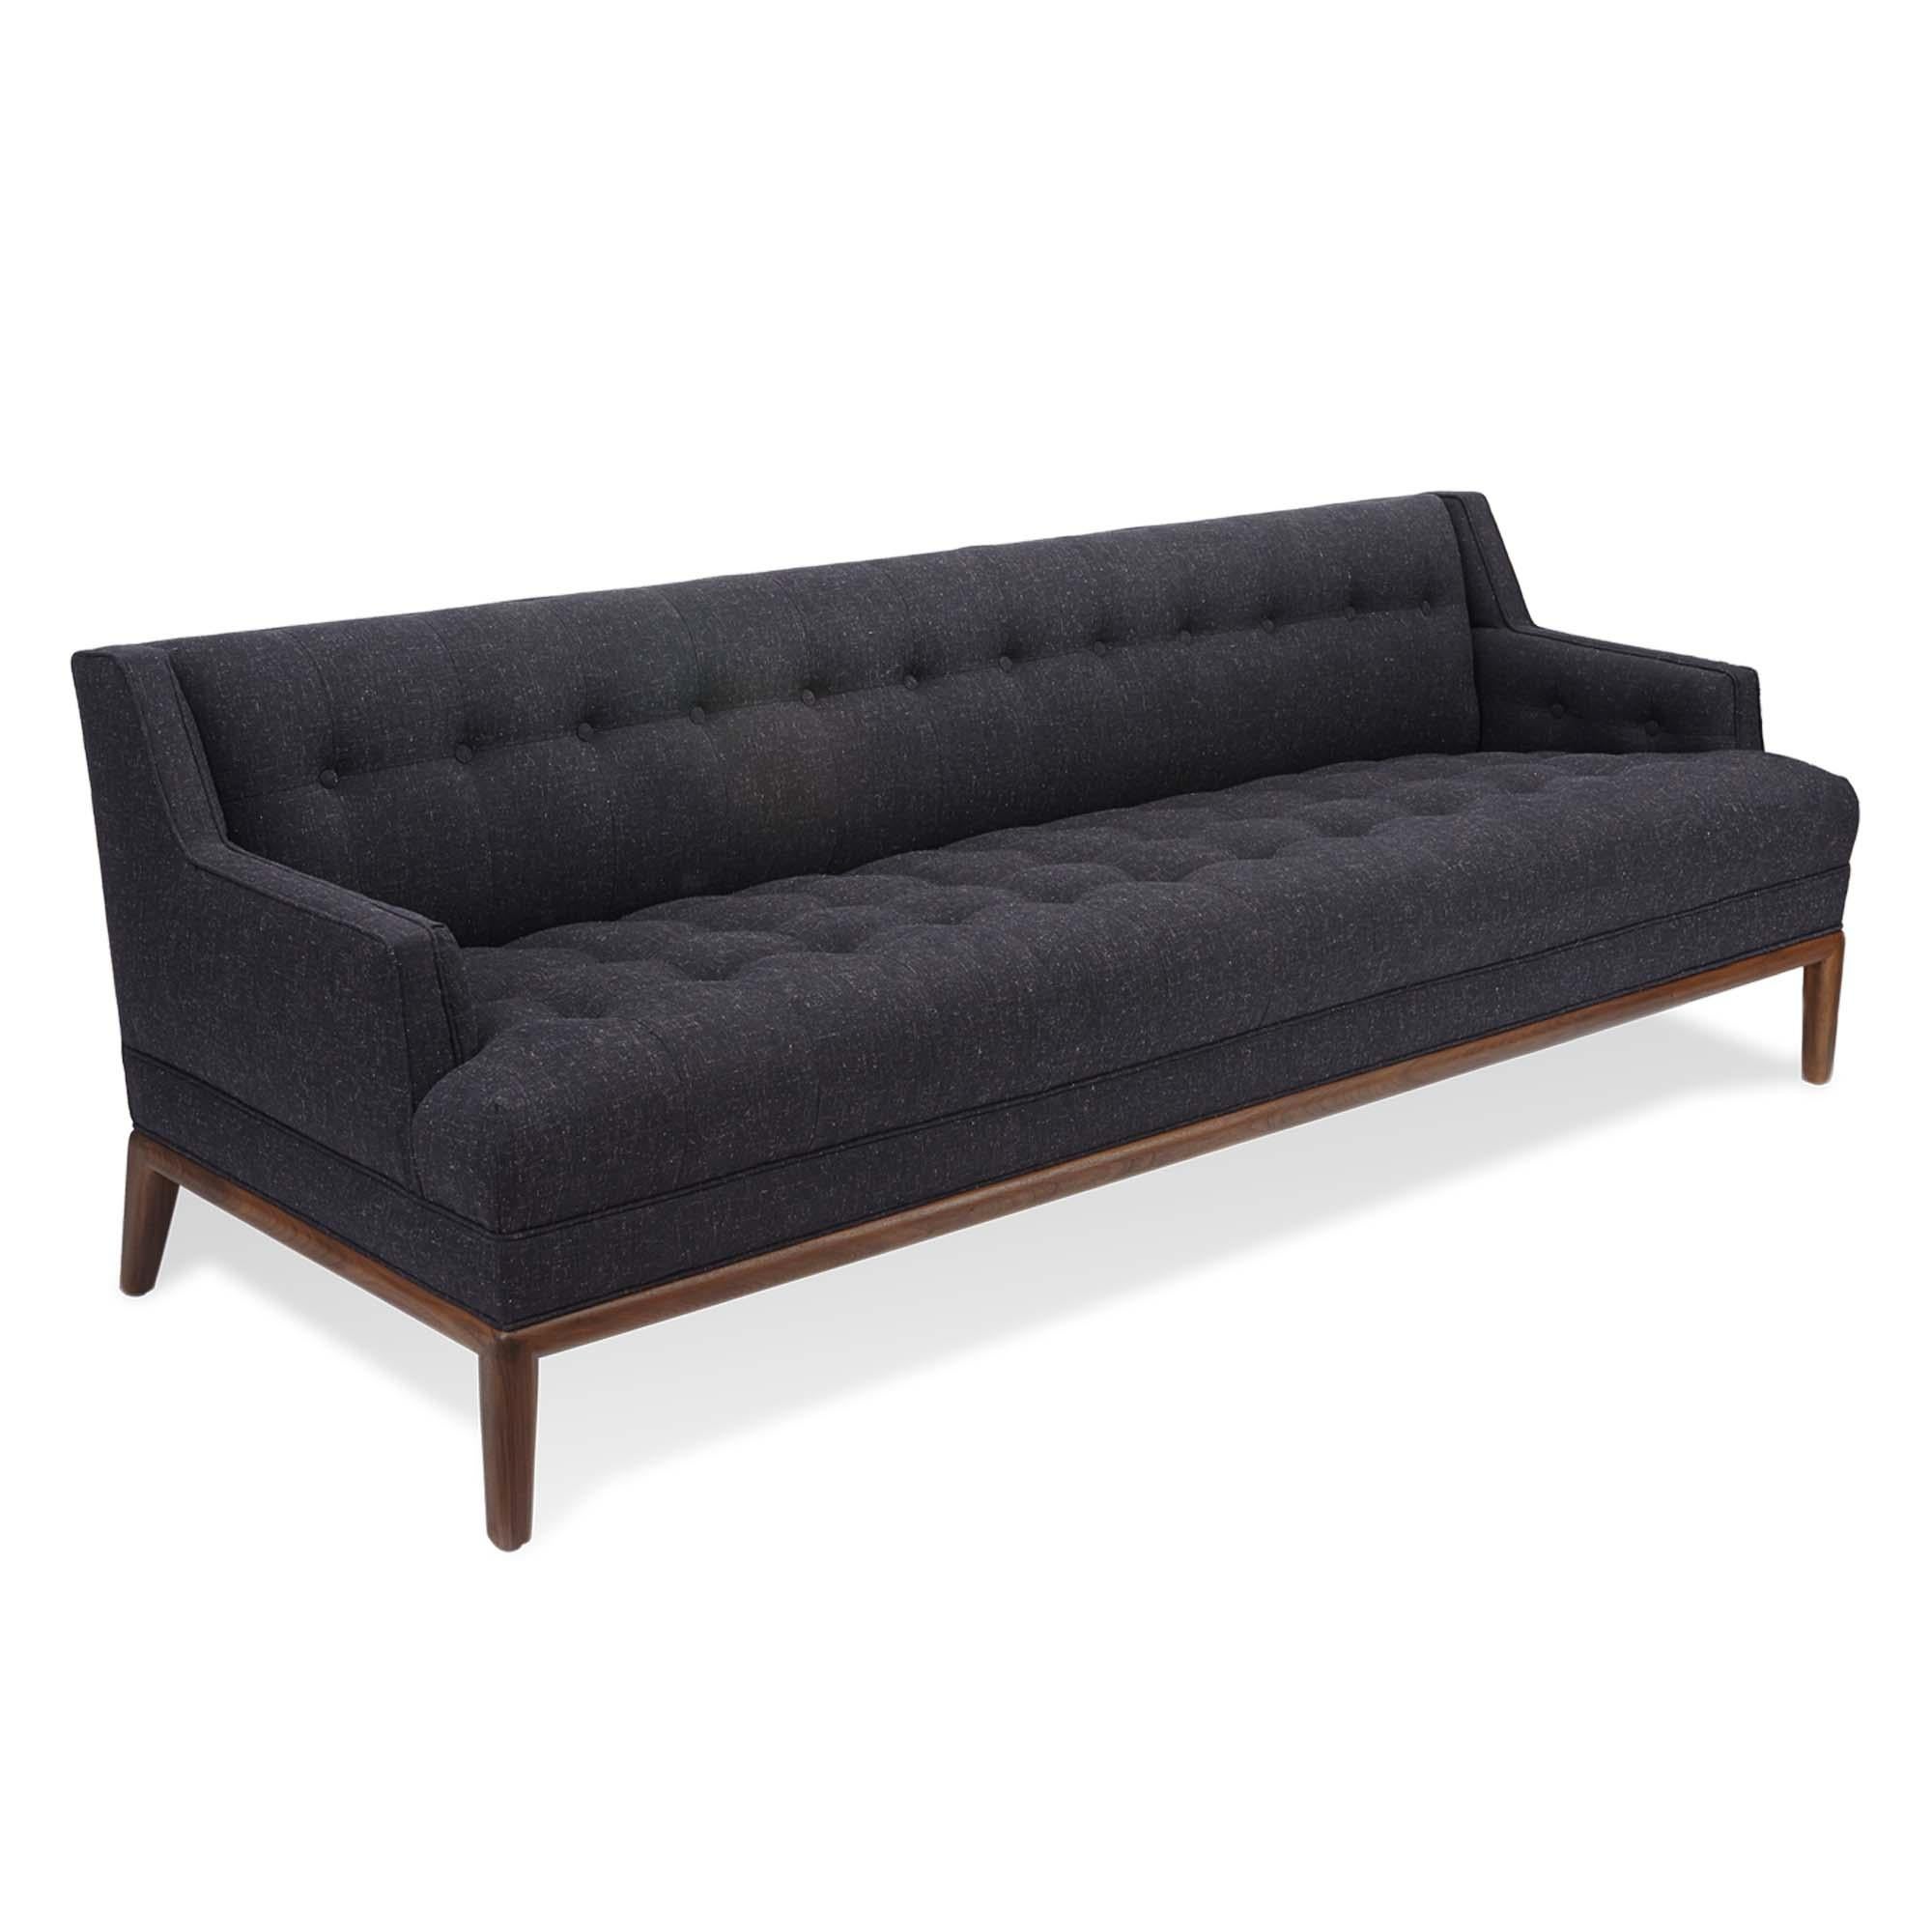 The Maurice sofa is a midcentury inspired sofa with a tufted seat, back, and inner arms and piped details. The sofa rests atop a simple, rounded American walnut or white oak base. 

The Lawson-Fenning Collection is designed and handmade in Los